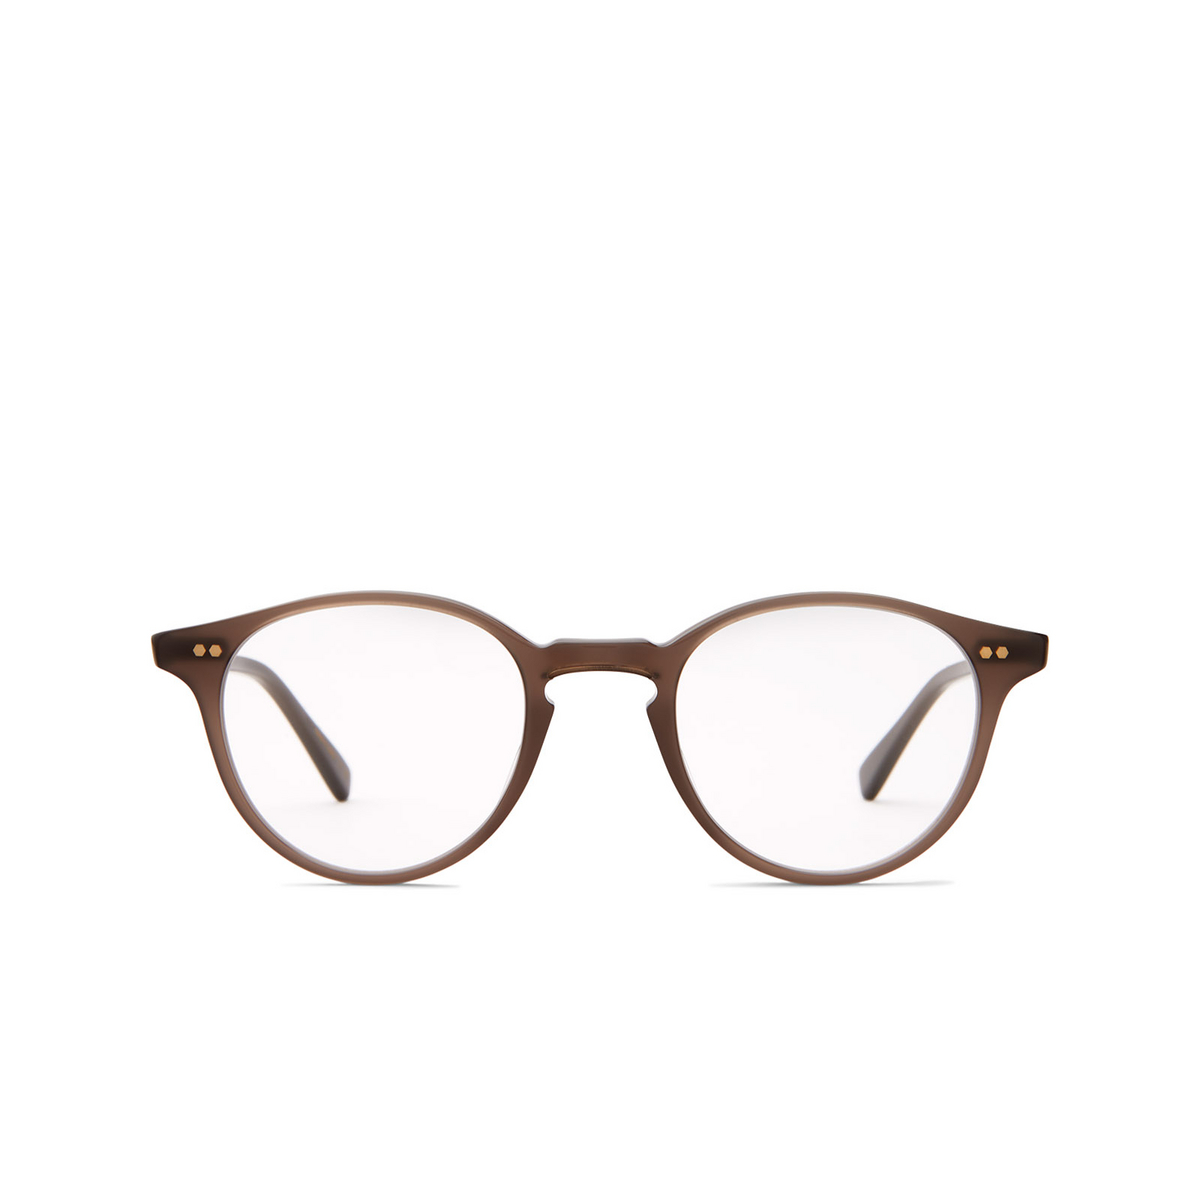 Mr. Leight MARMONT C Eyeglasses TRU-ATG Truffle-Antique Gold - front view